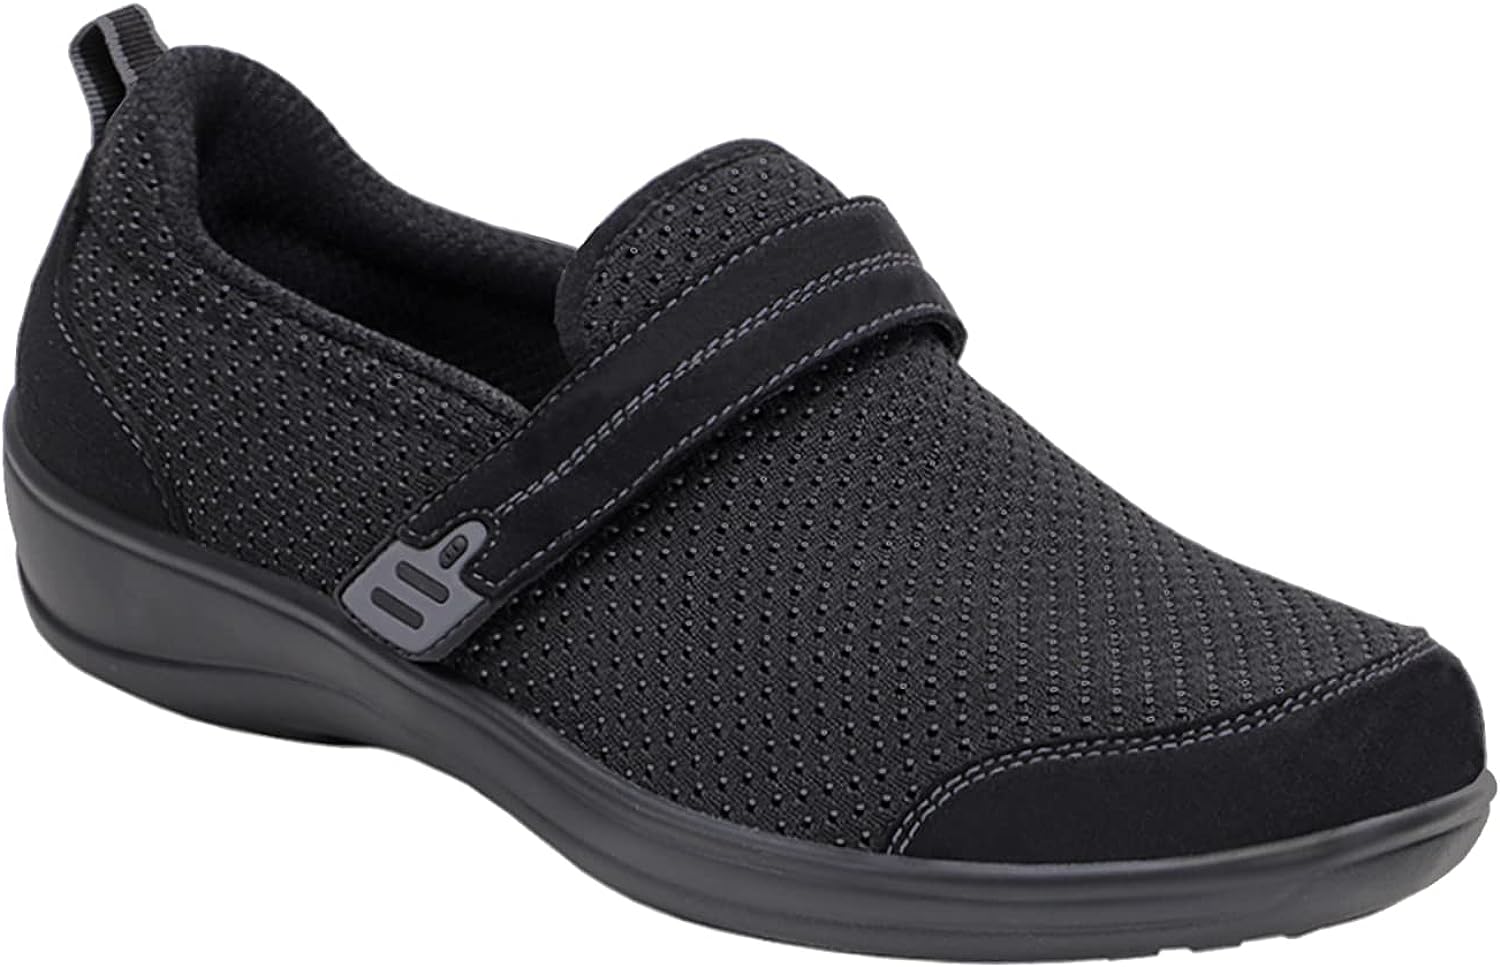 Orthofeet Women's Casual Orthopedic Slip-ons with Arch [...]